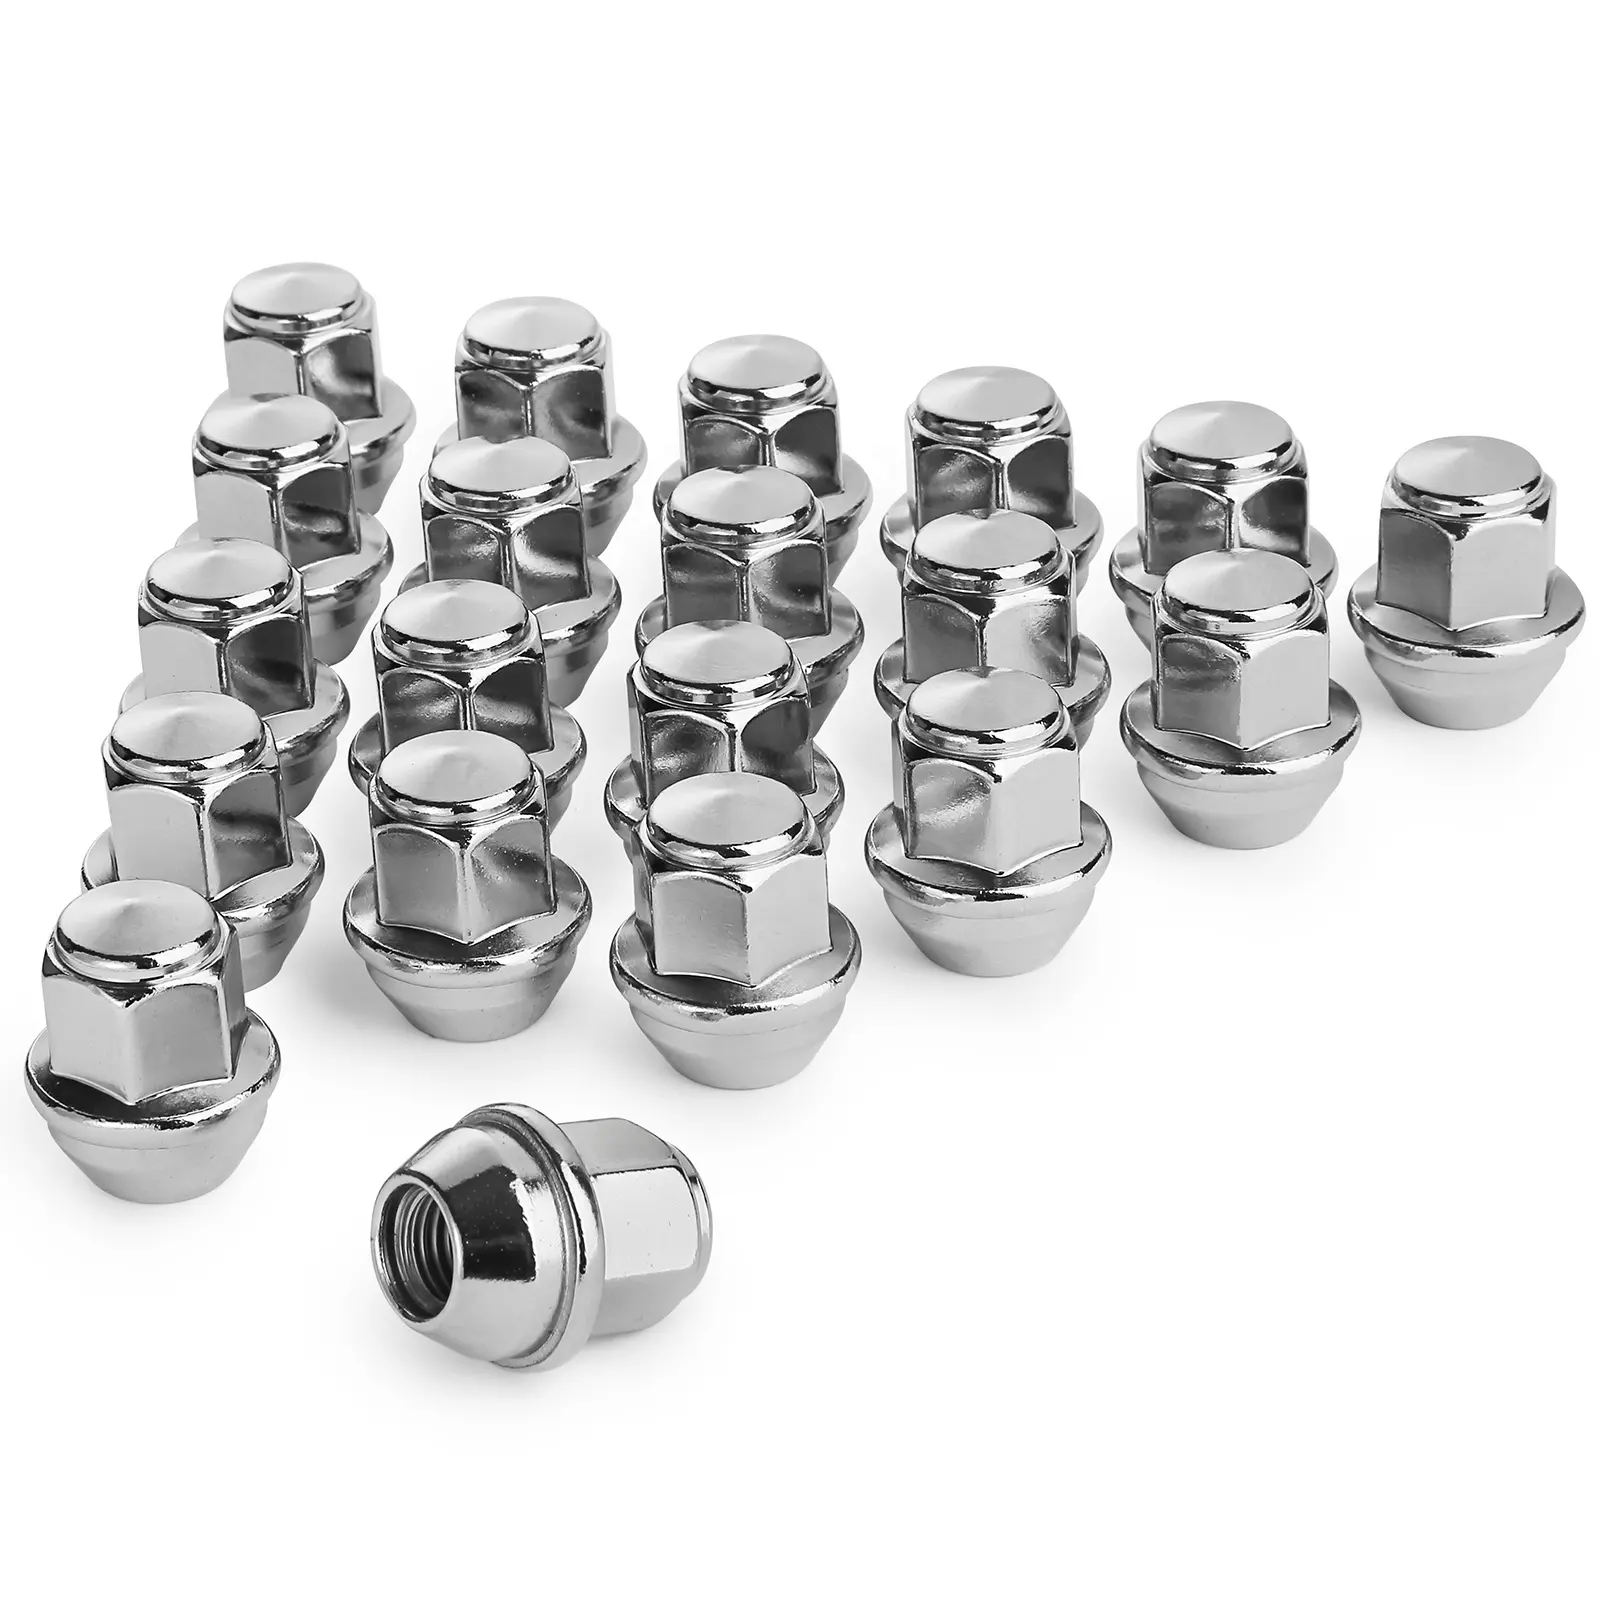 20 PCS M12x1.5 Chrome Hex19 3/4" Acorn Seat Lug Nut for Most of Ford vehicles